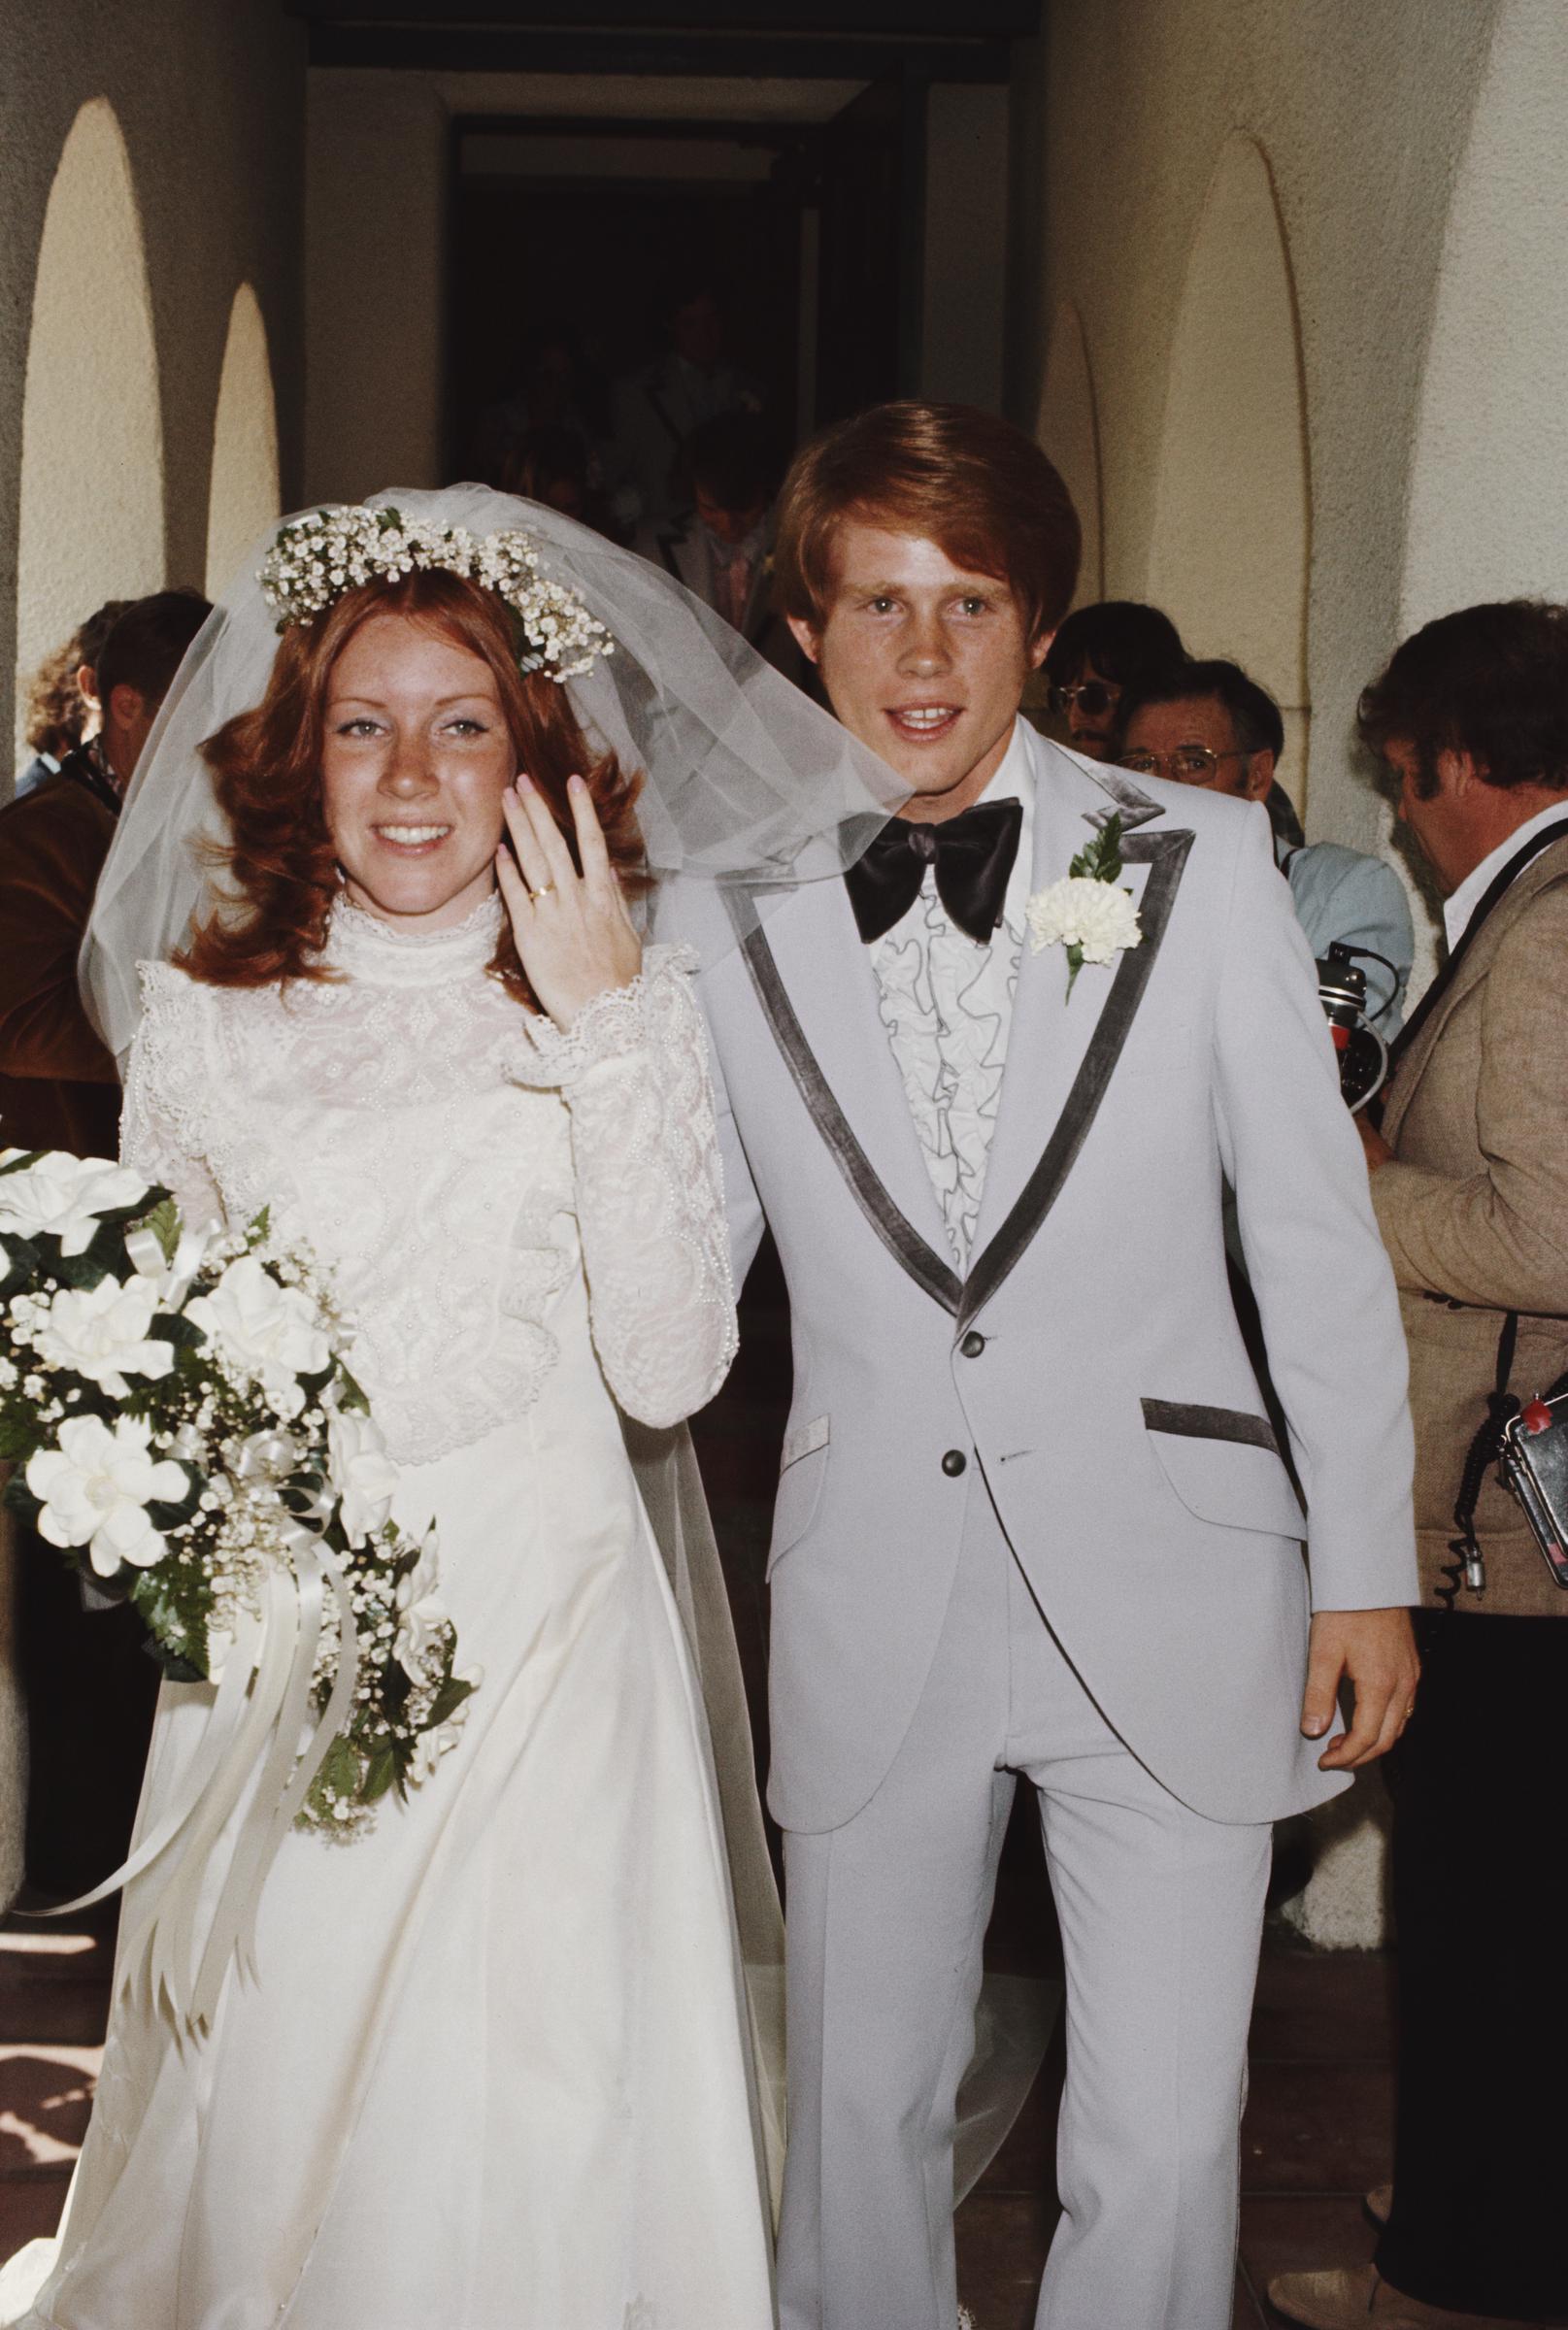 Cheryl Alley and Ron Howard's wedding at the Magnolia Park United Methodist Church in Burbank, California, on June 7, 1975. Photo: Getty Images